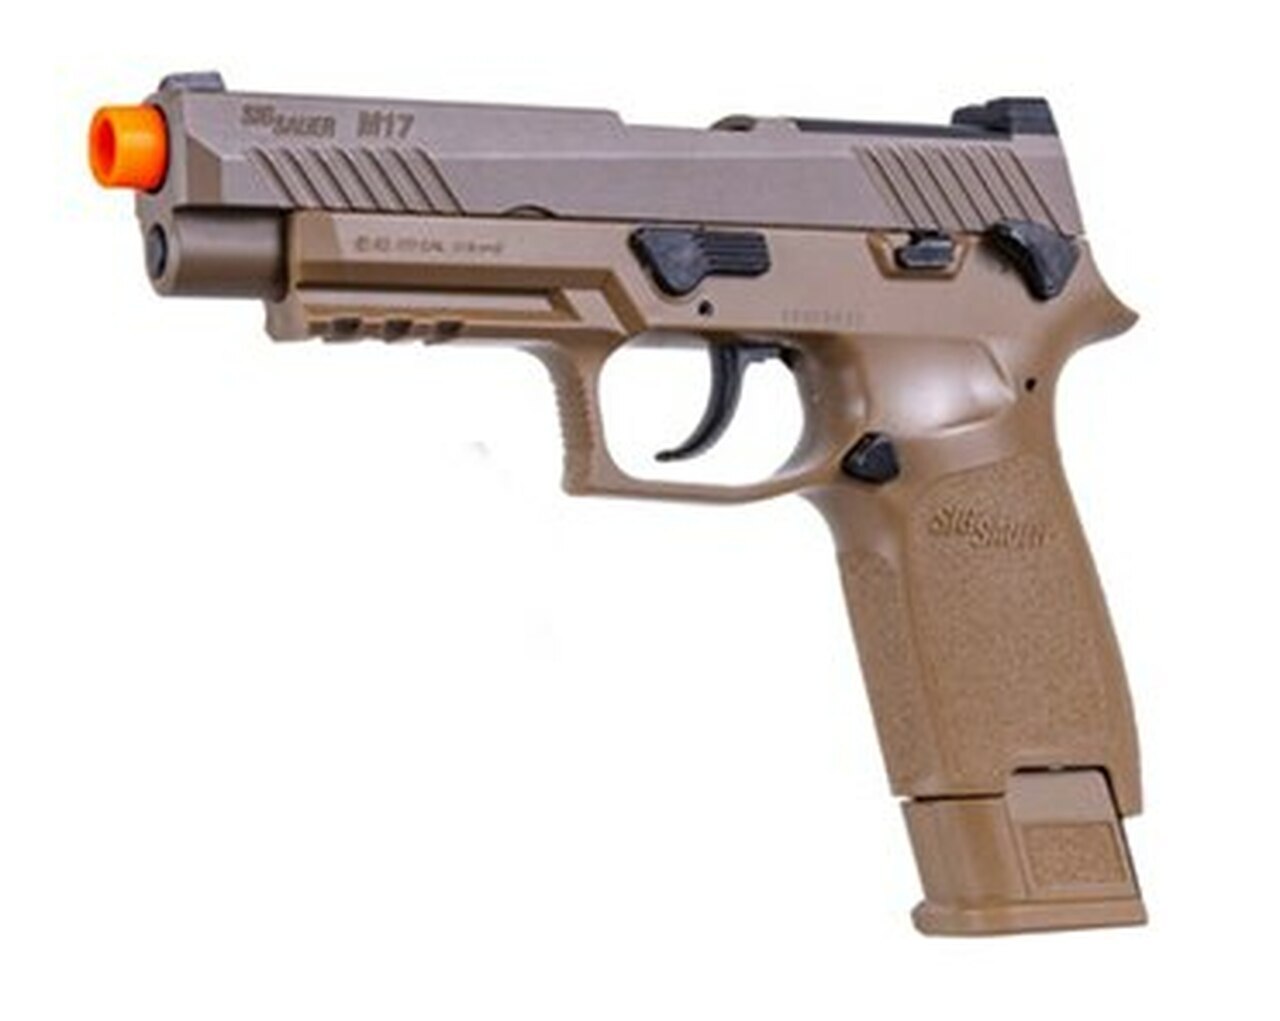 Image of Sig Airsoft Proforce M17, 6mm, 5.5", 21rd, Green GAS Power Source, Coyote Tan